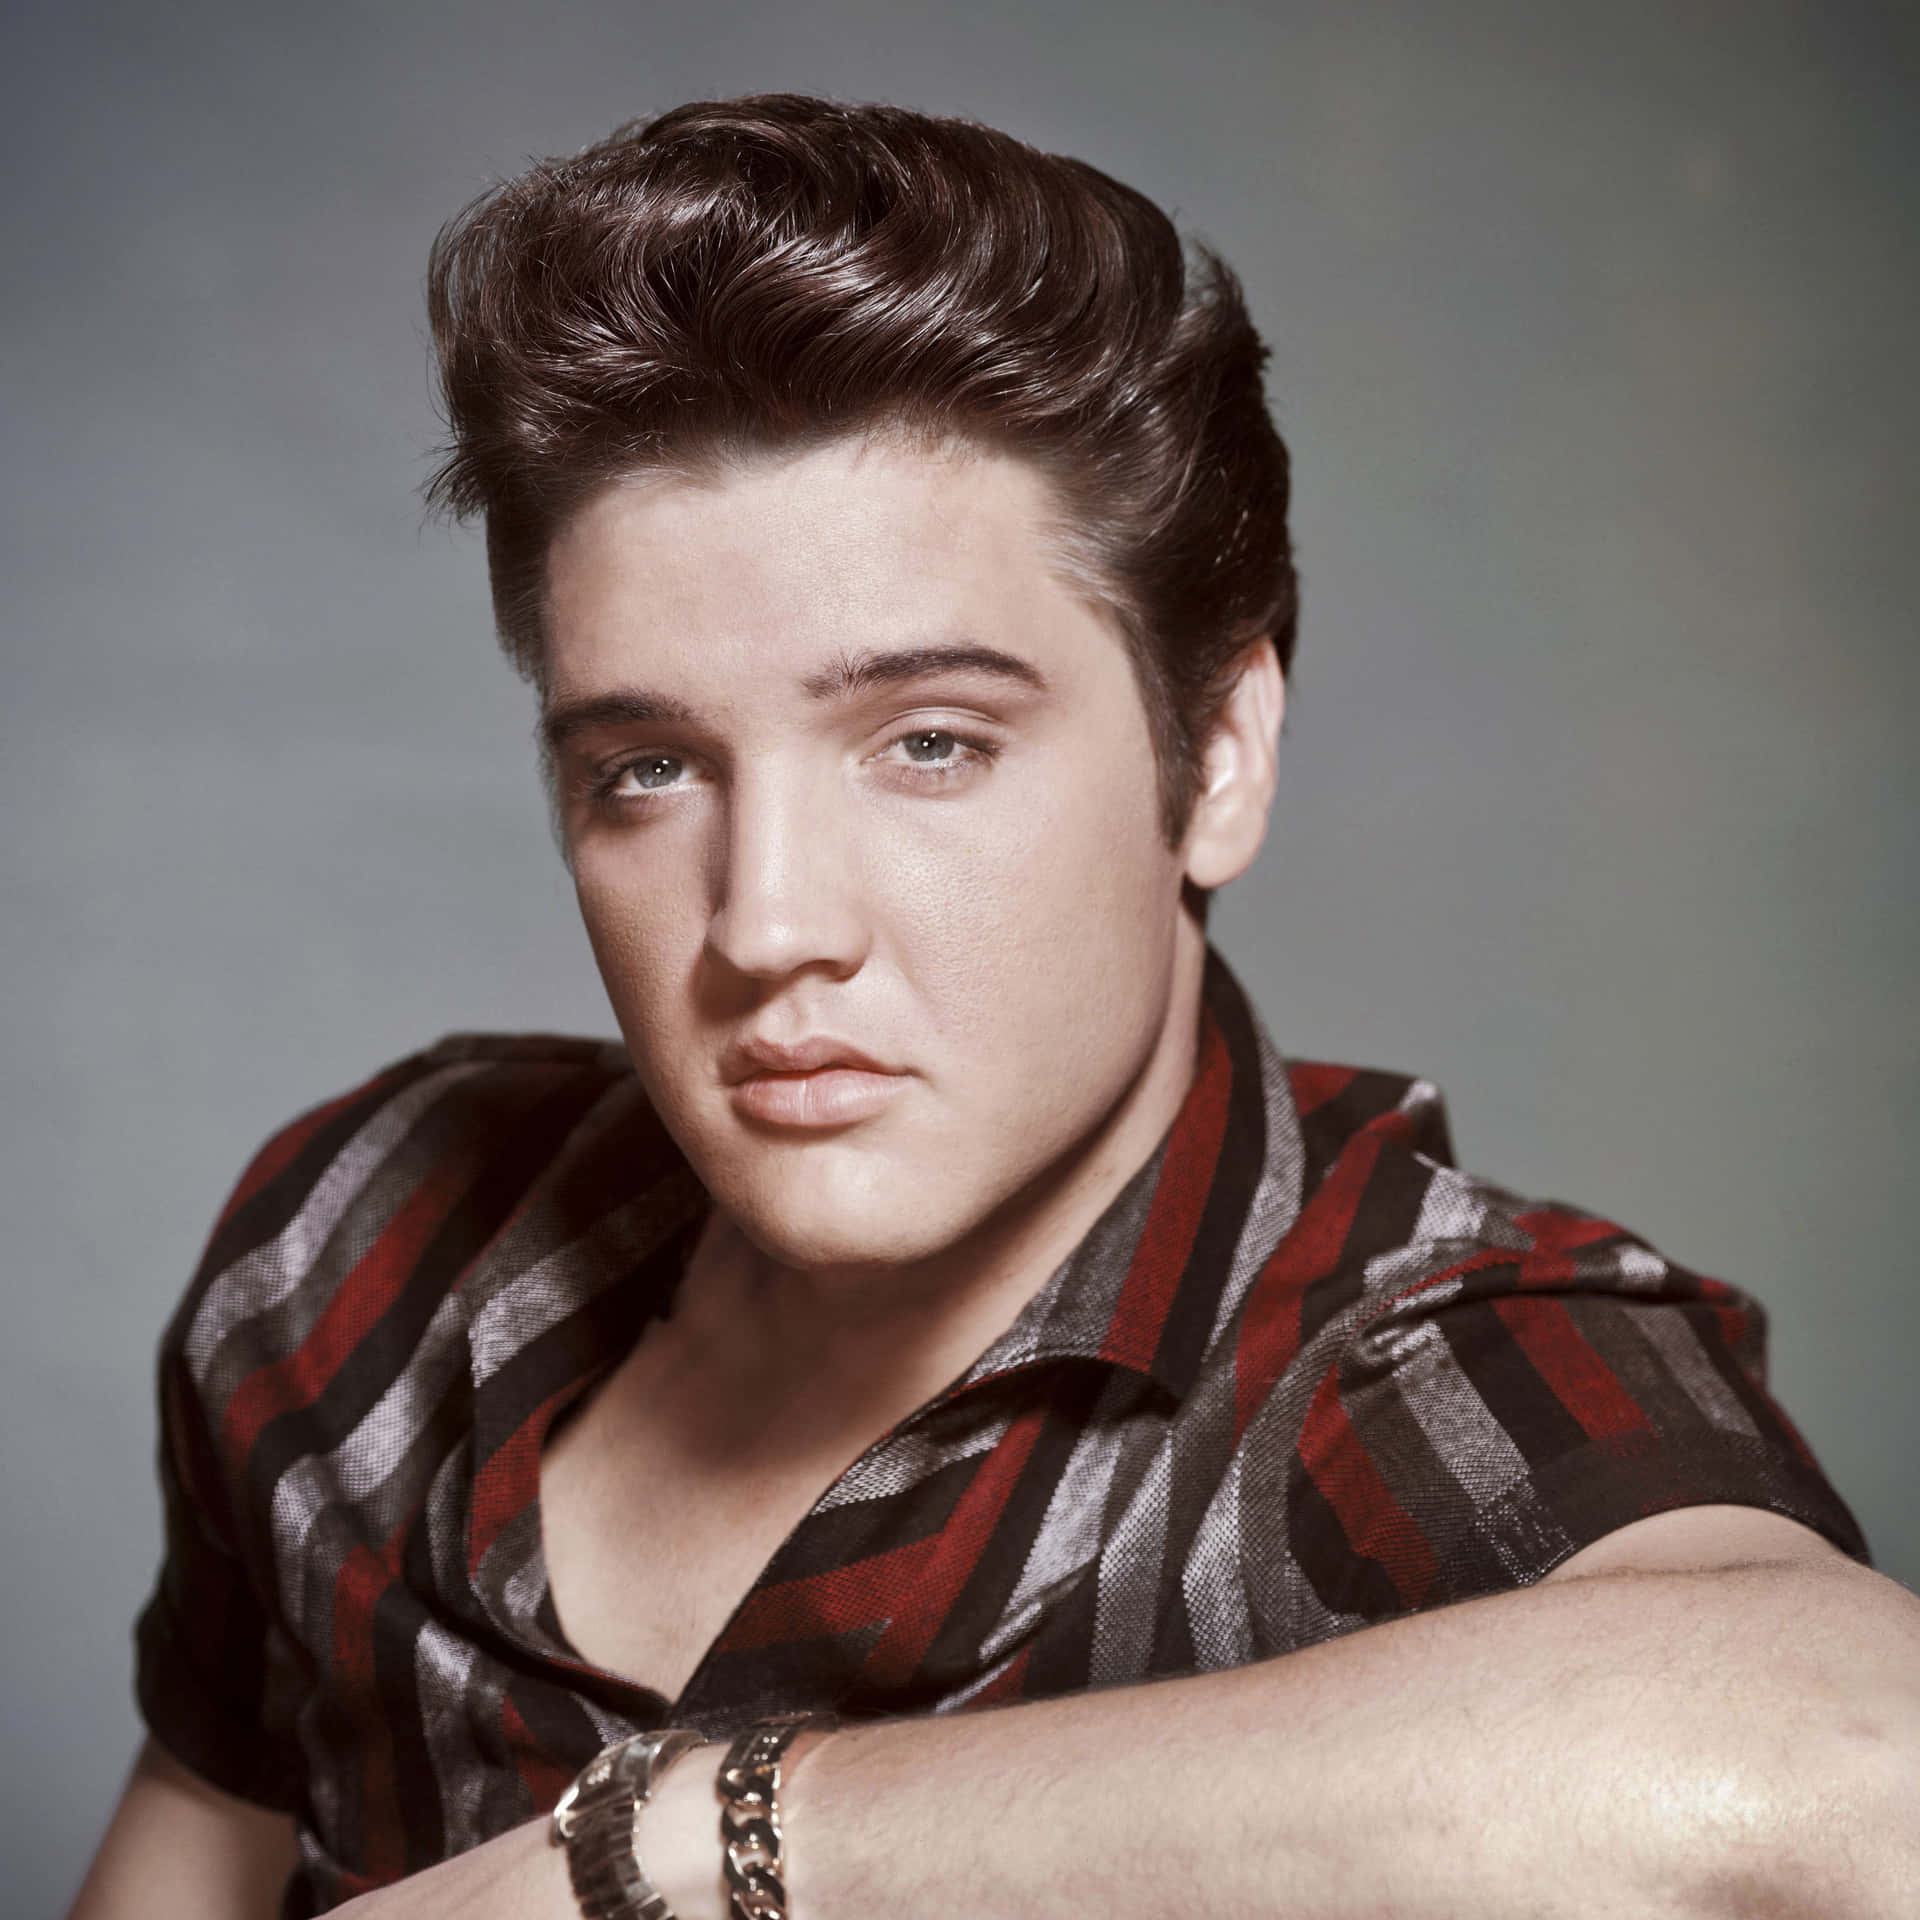 Elvis Presley - A Portrait Of The Man